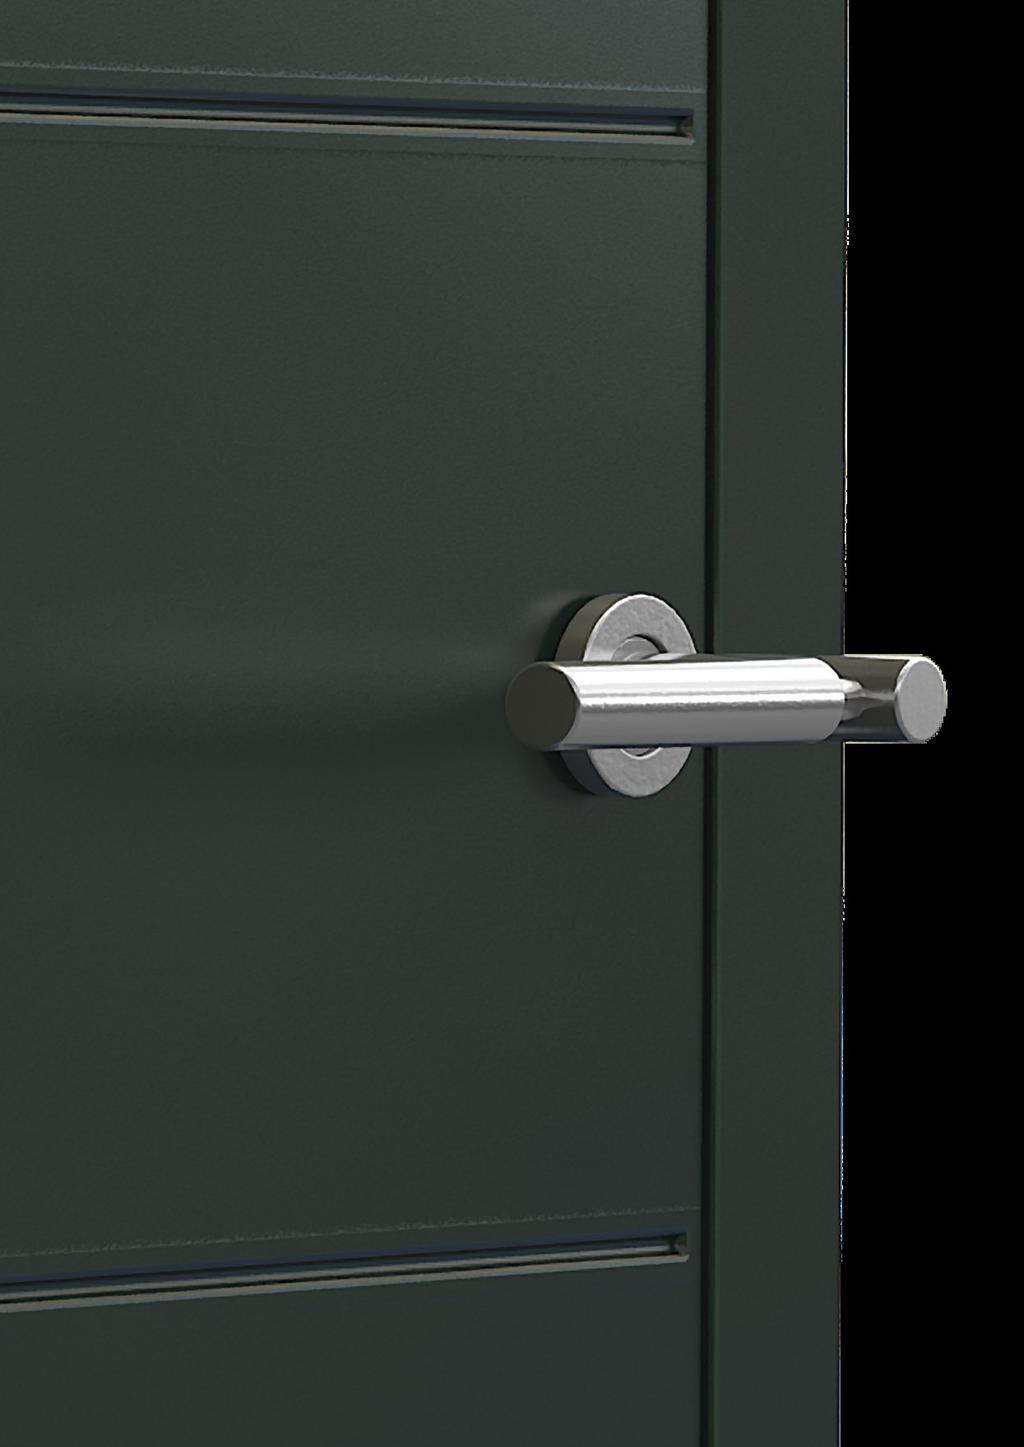 Finishing touches Our design team selected a range of door furniture that would match the quality and performance of the Designer Door, while at the same time complementing its elegant good looks.